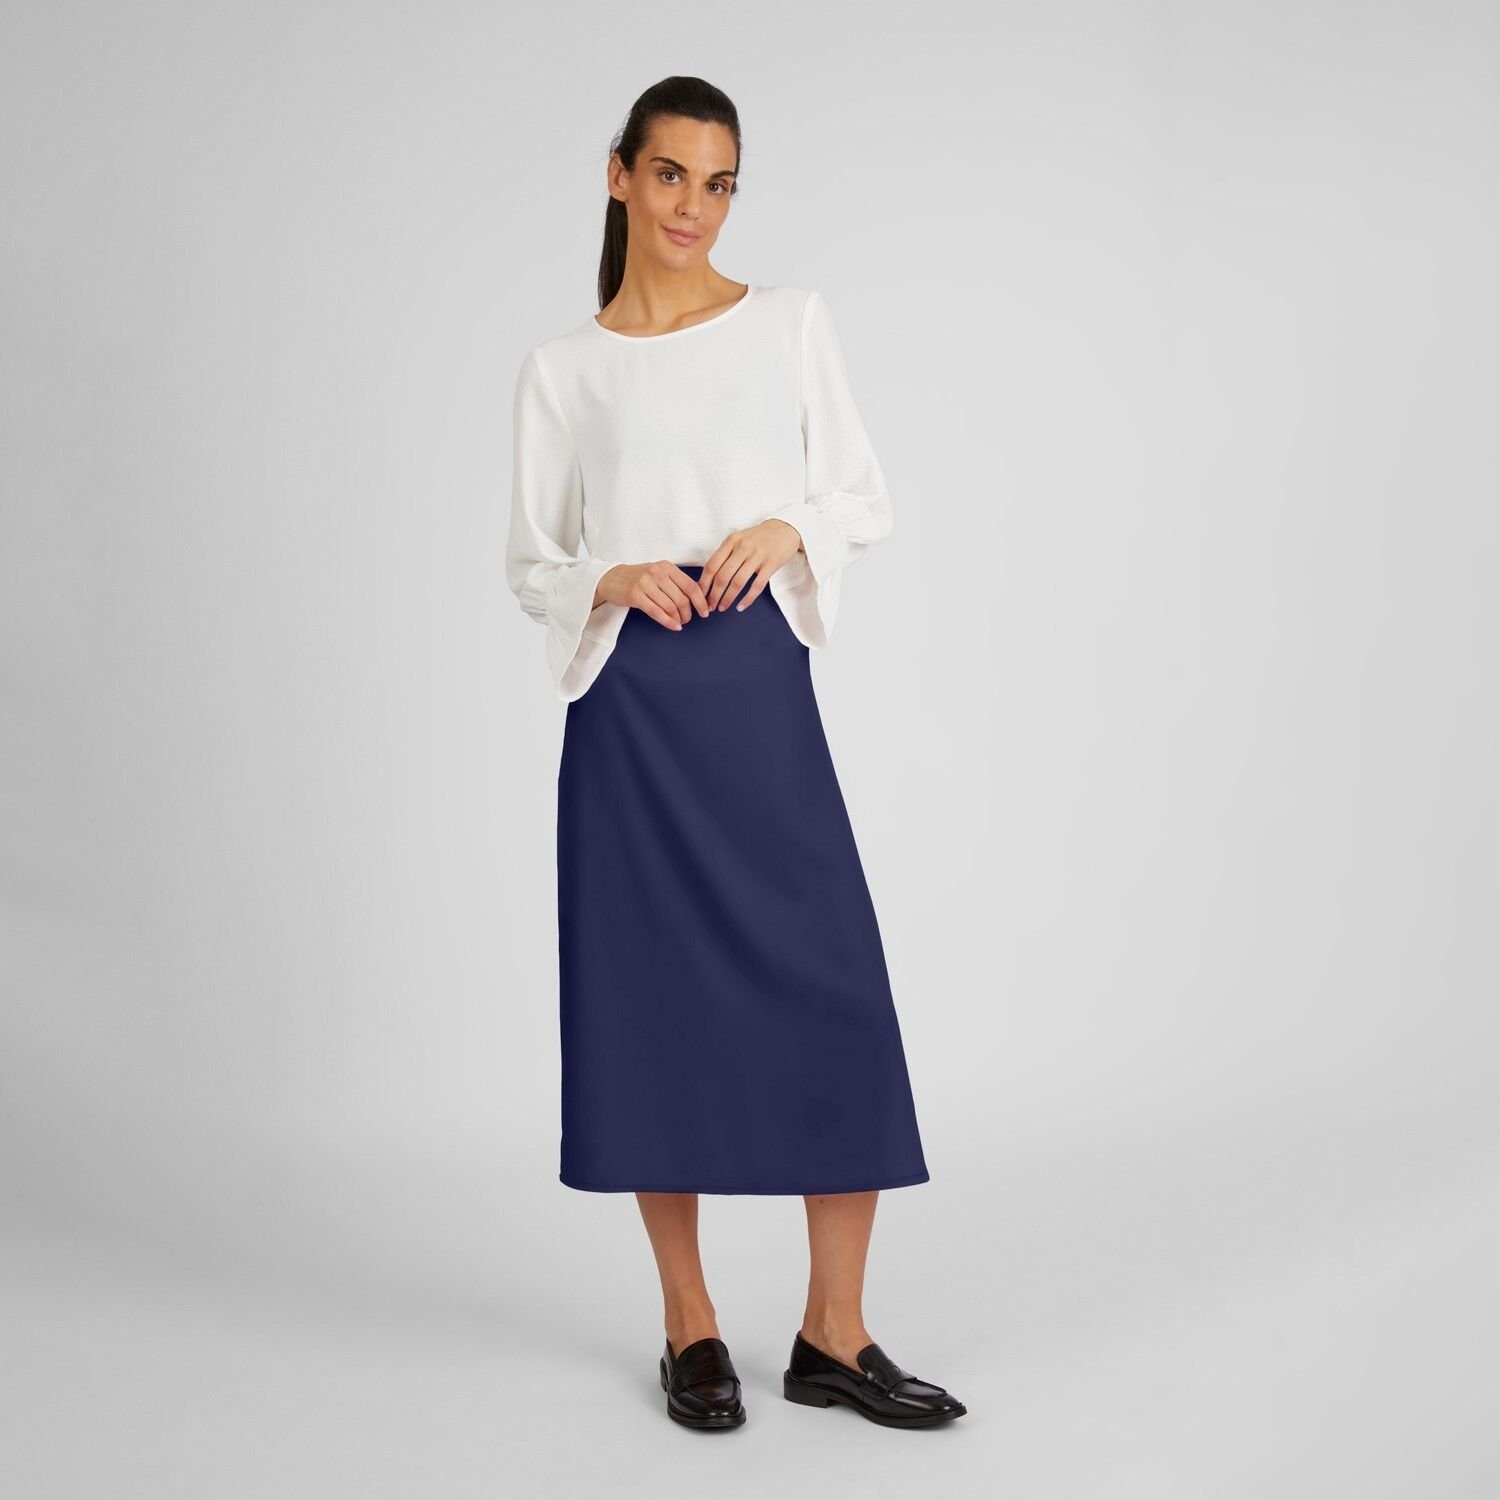 lovely sisters A-Linien-Rock Ronja abstraktem blue Herz-Muster mit navy